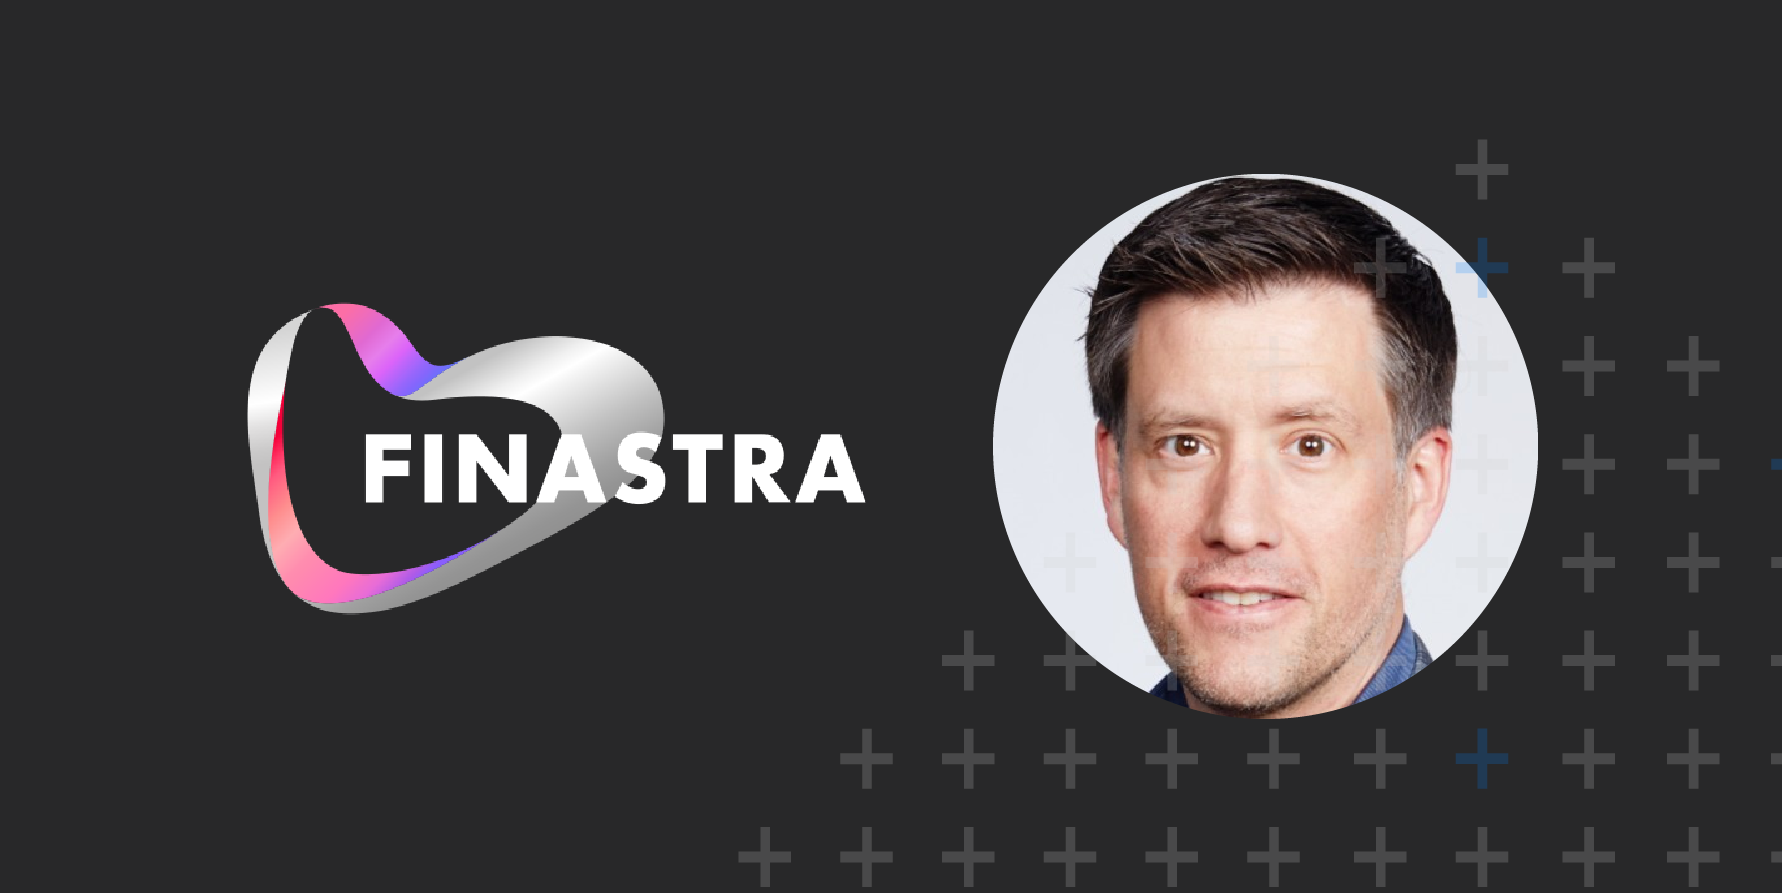 Banner with Finastra logo and headshot photograph of Dan Jacobs, VP of Finance and Sales Operations at Finastra